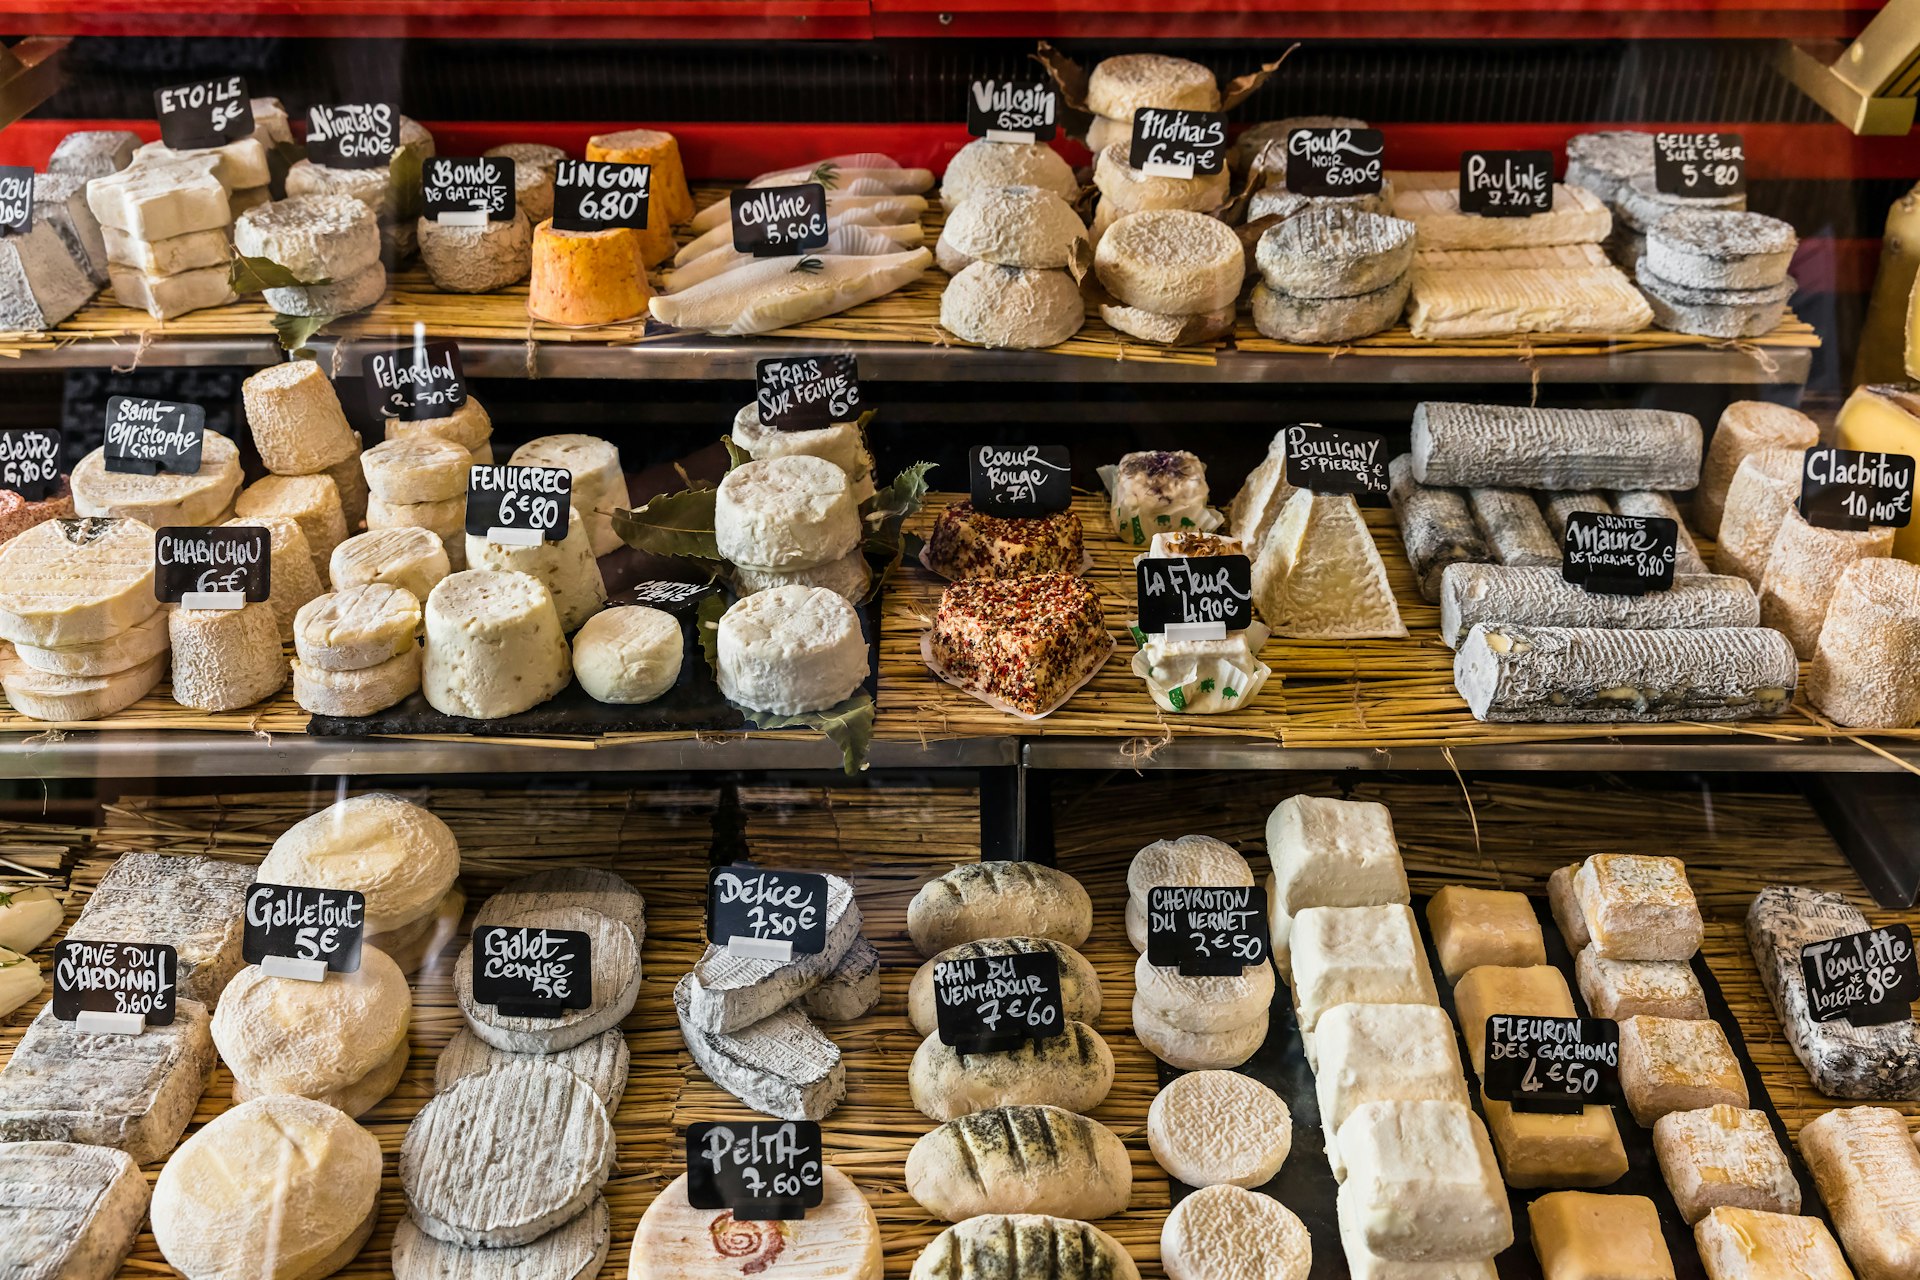 A selection of French and Italian cheeses on display in a food hall. Each one has a small blackboard near it outlining the name and price.